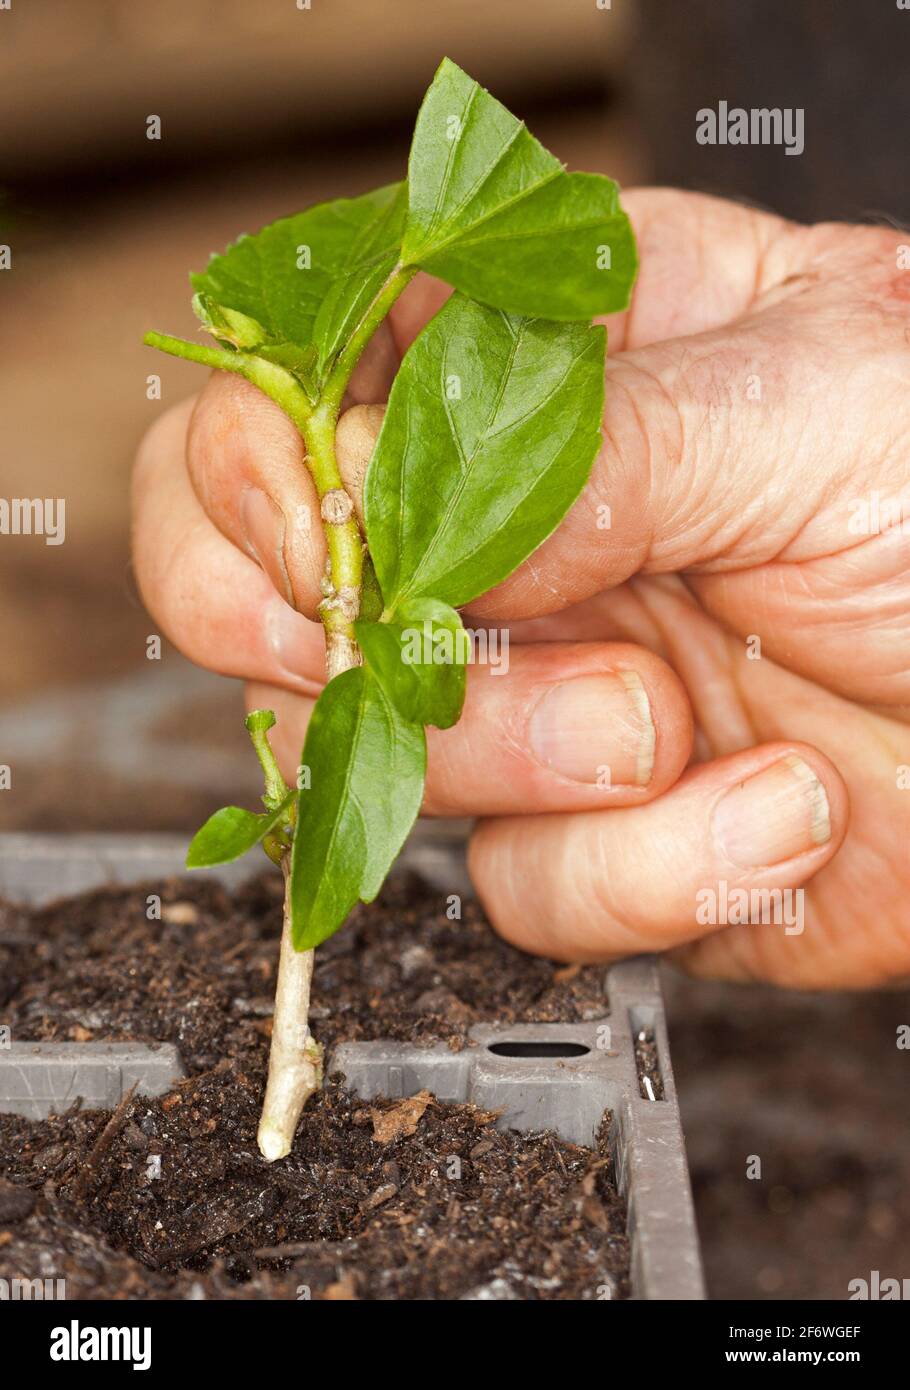 Hibiscus stem cutting held in a person's hand and begin planted into soil in propagation tray Stock Photo